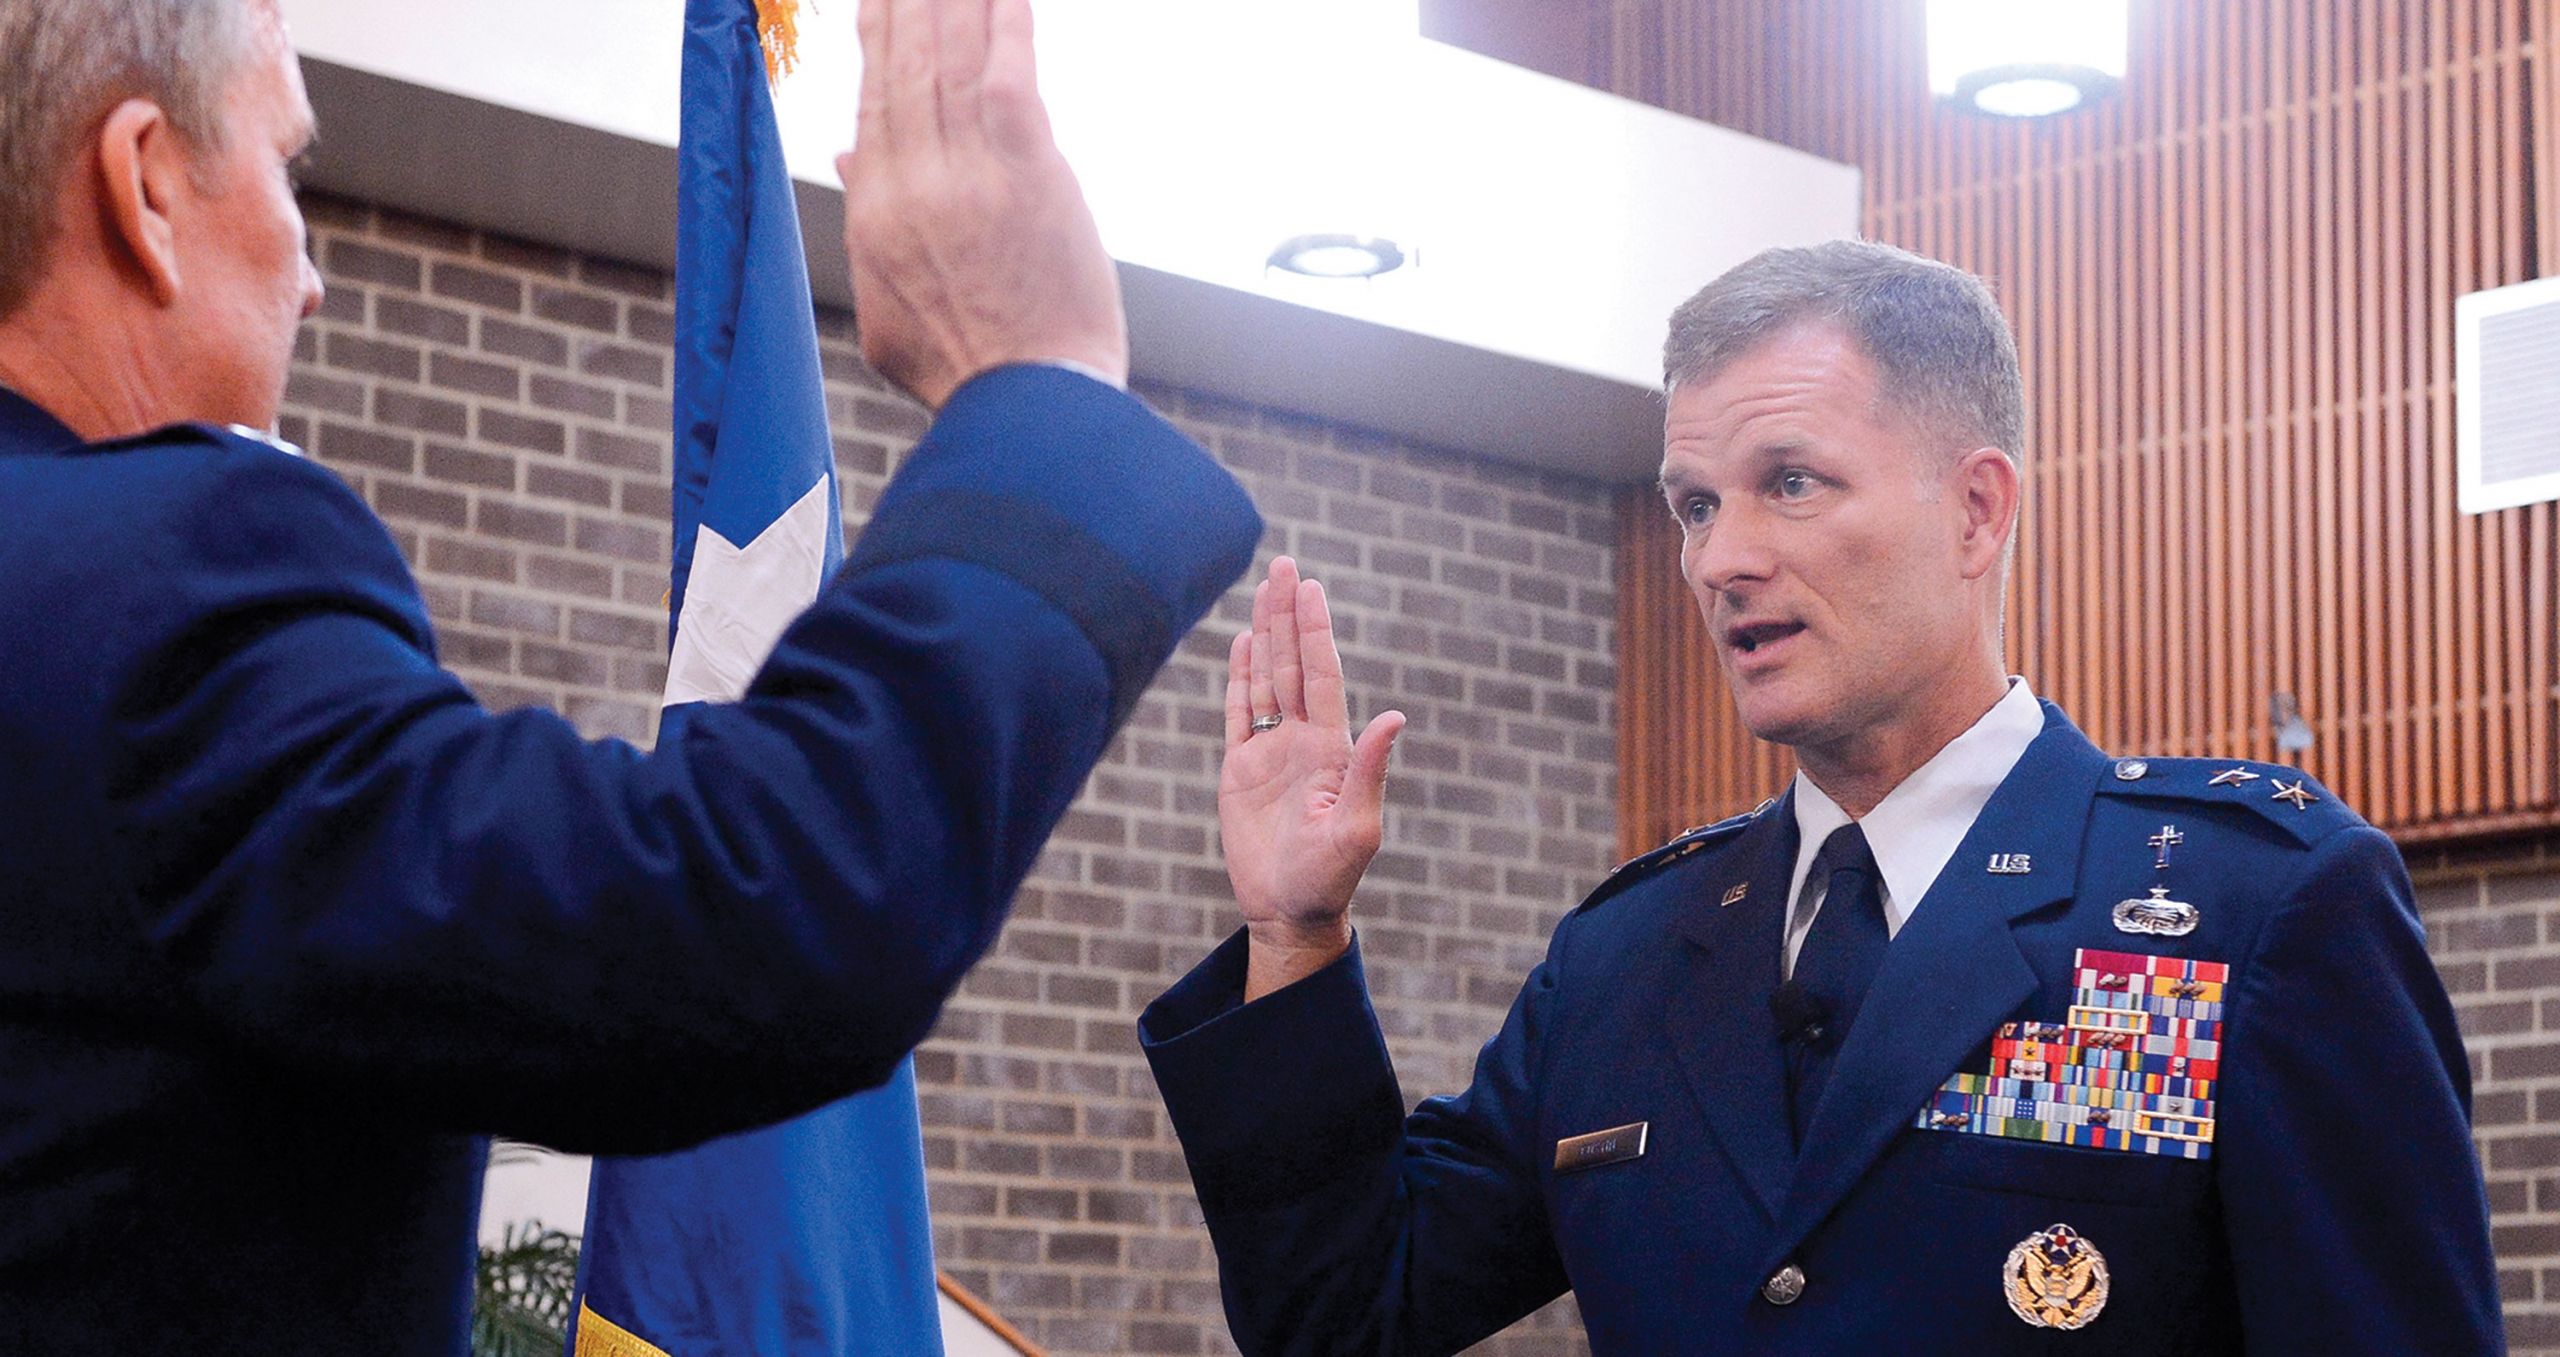 Major general, Dondi Costin (’91, ’92) now serves as Chief of Chaplains of the United States Air Force. He was nominated for this position by President of the United States Barack Obama.